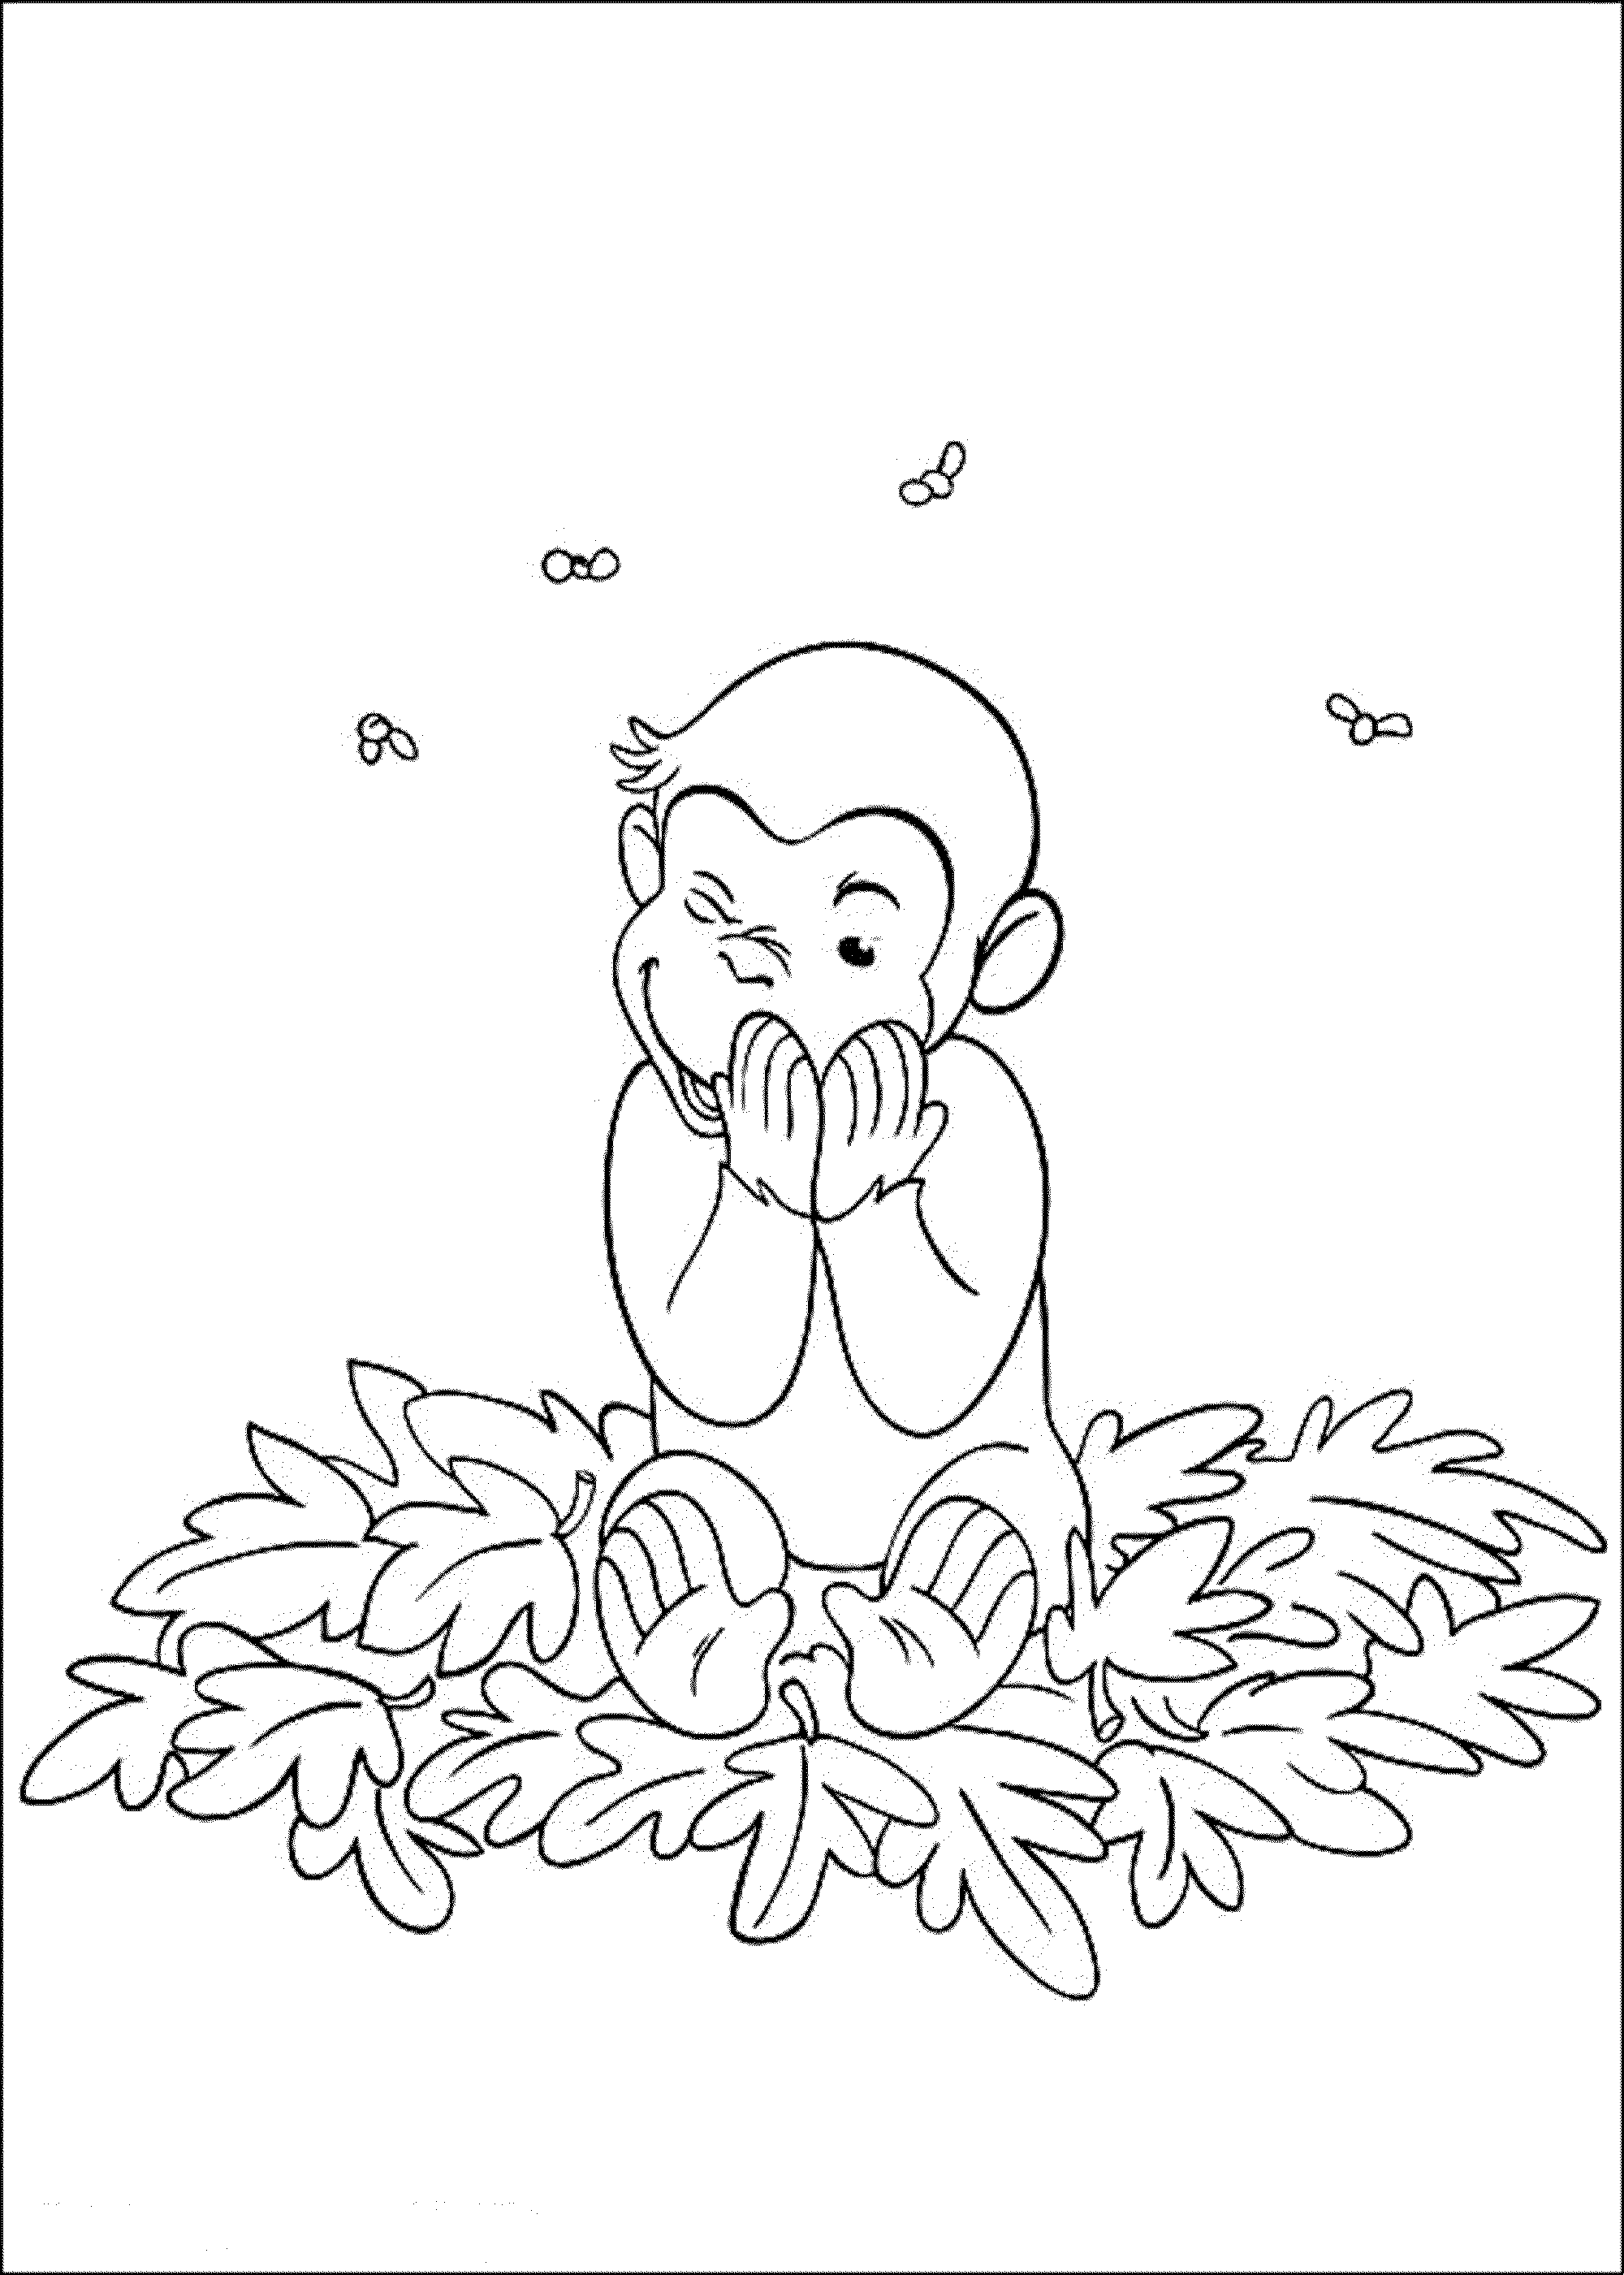 Print & Download - Curious George Coloring Pages to ...